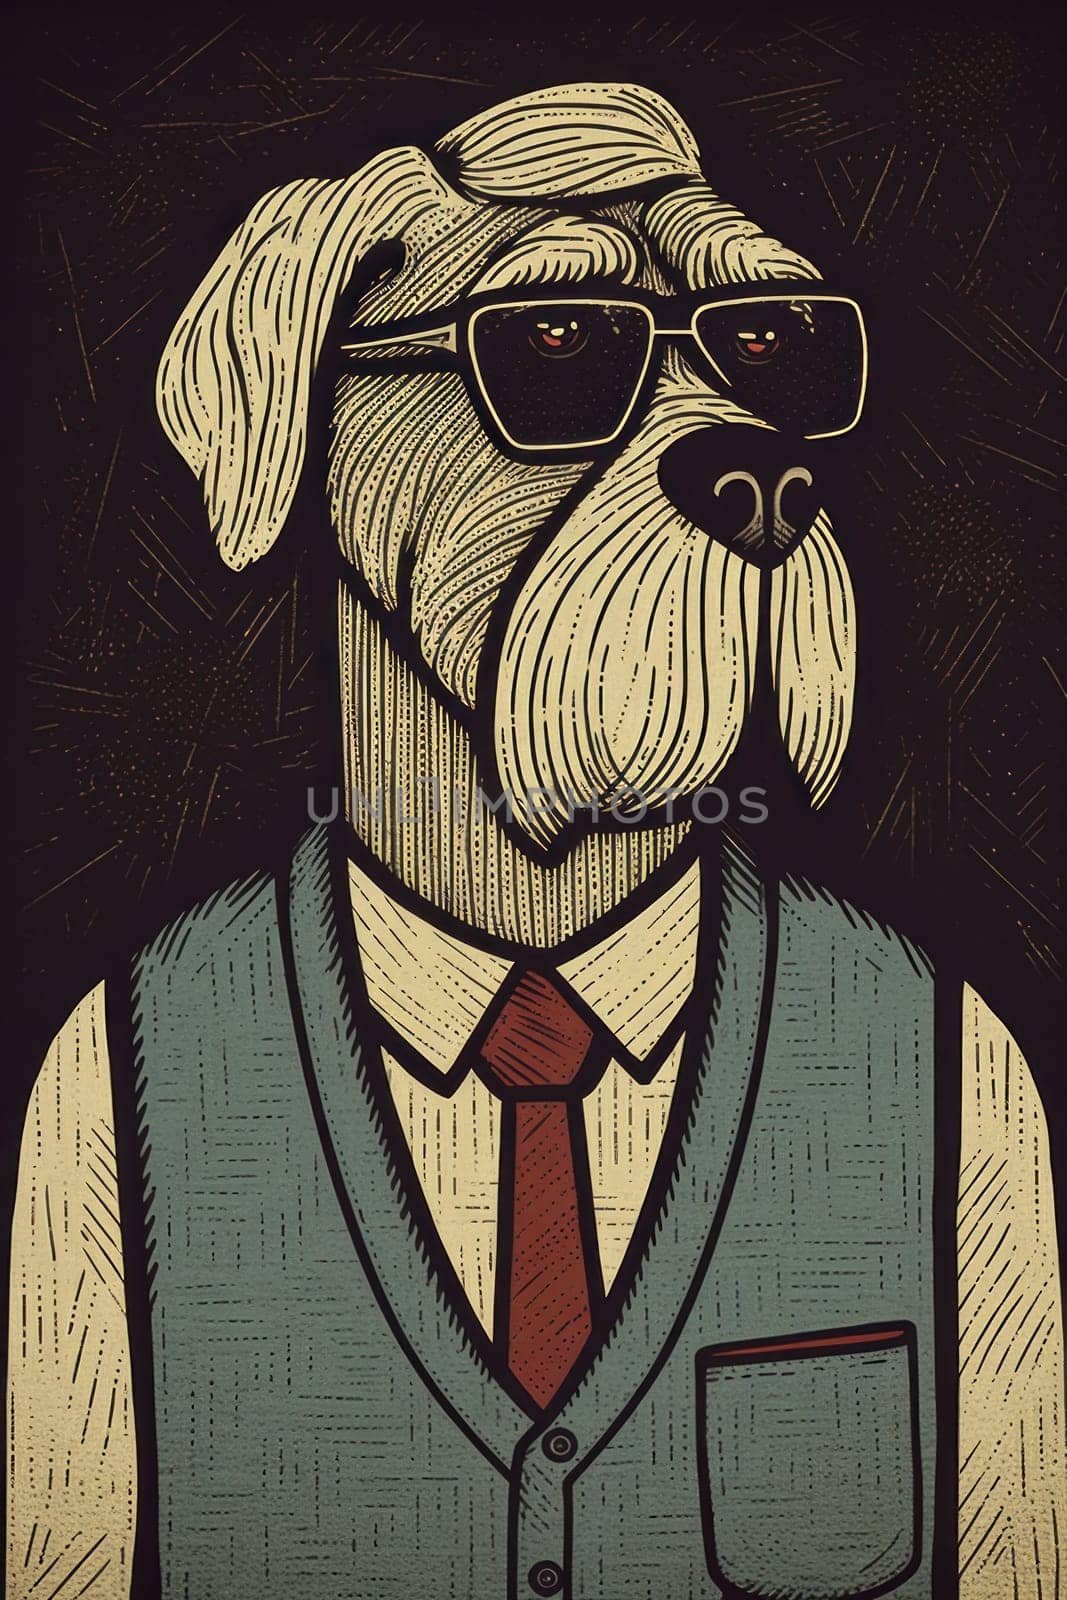 A drawing of a dog wearing glasses and a vest